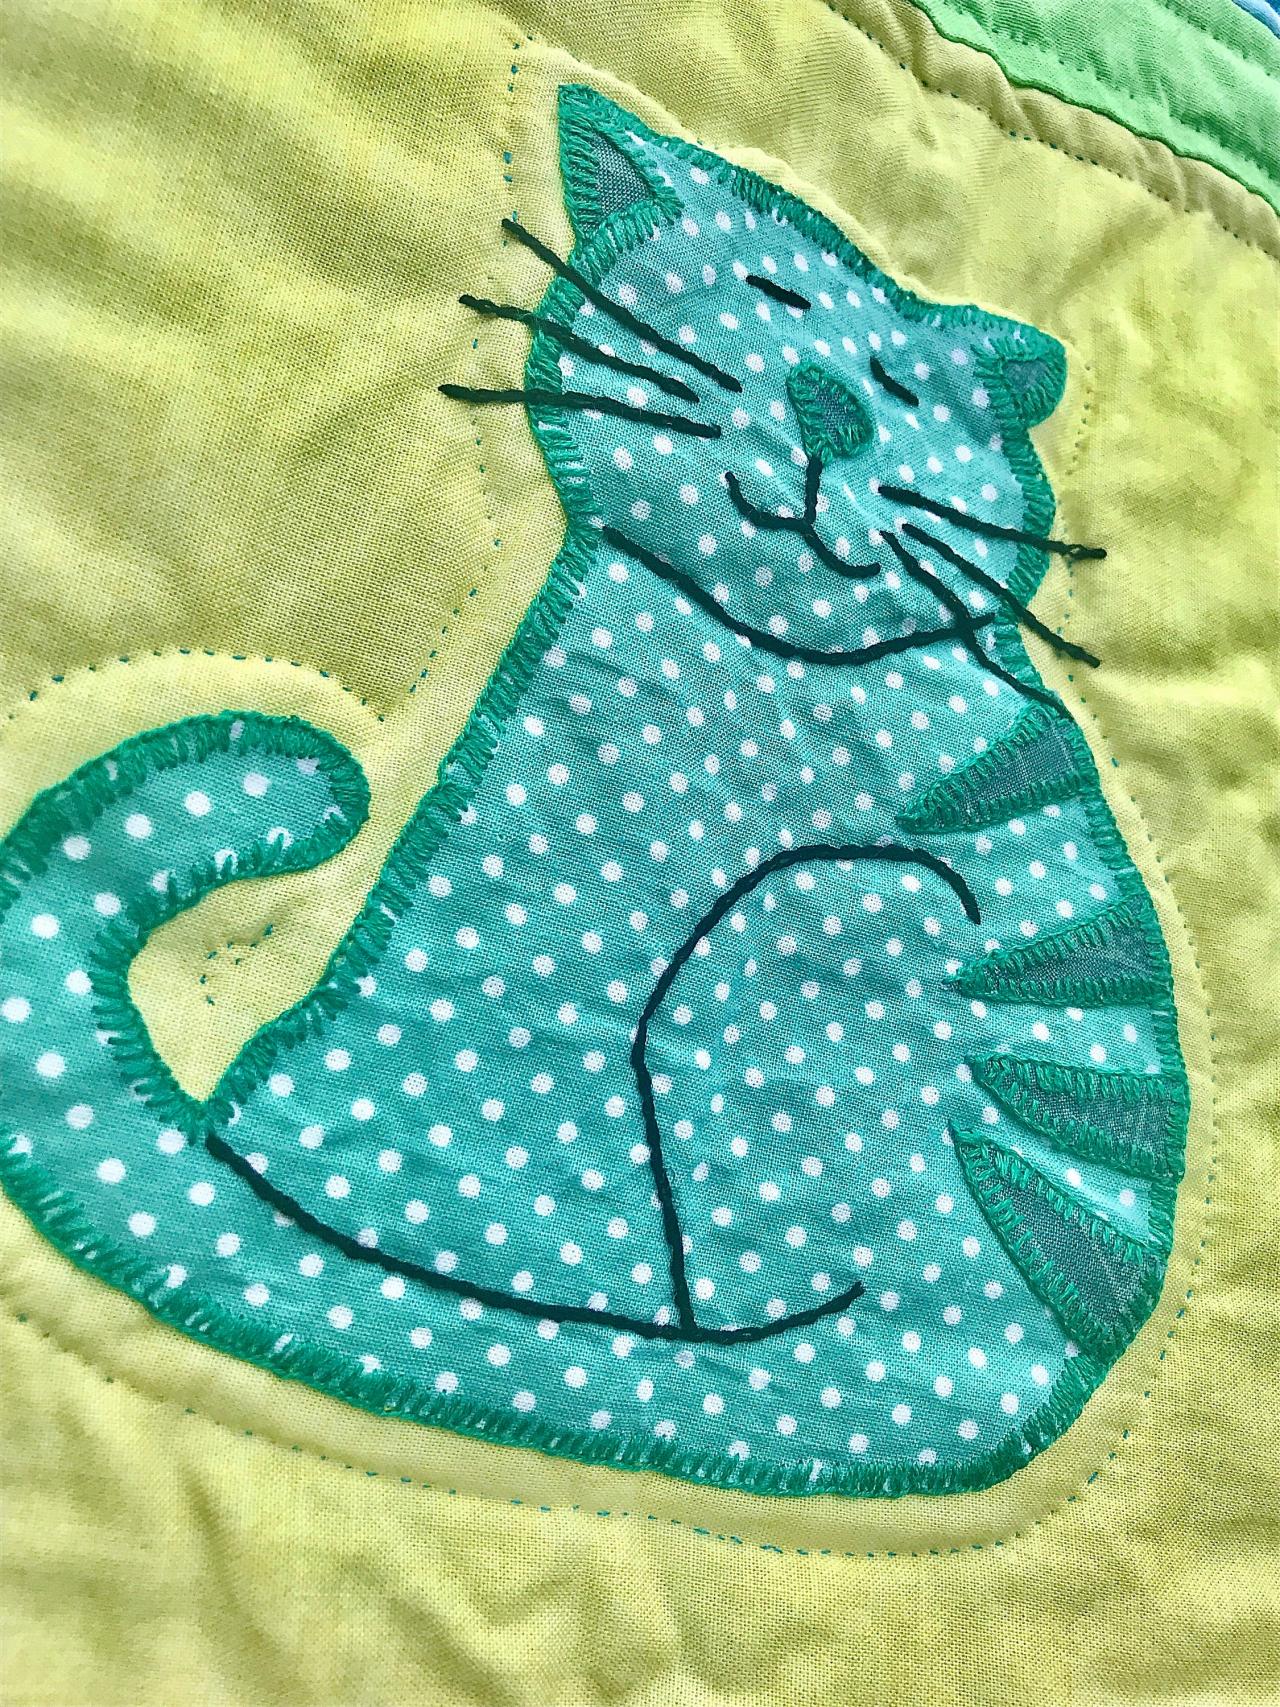 Cute hand stitched baby quilted cover or play mat.